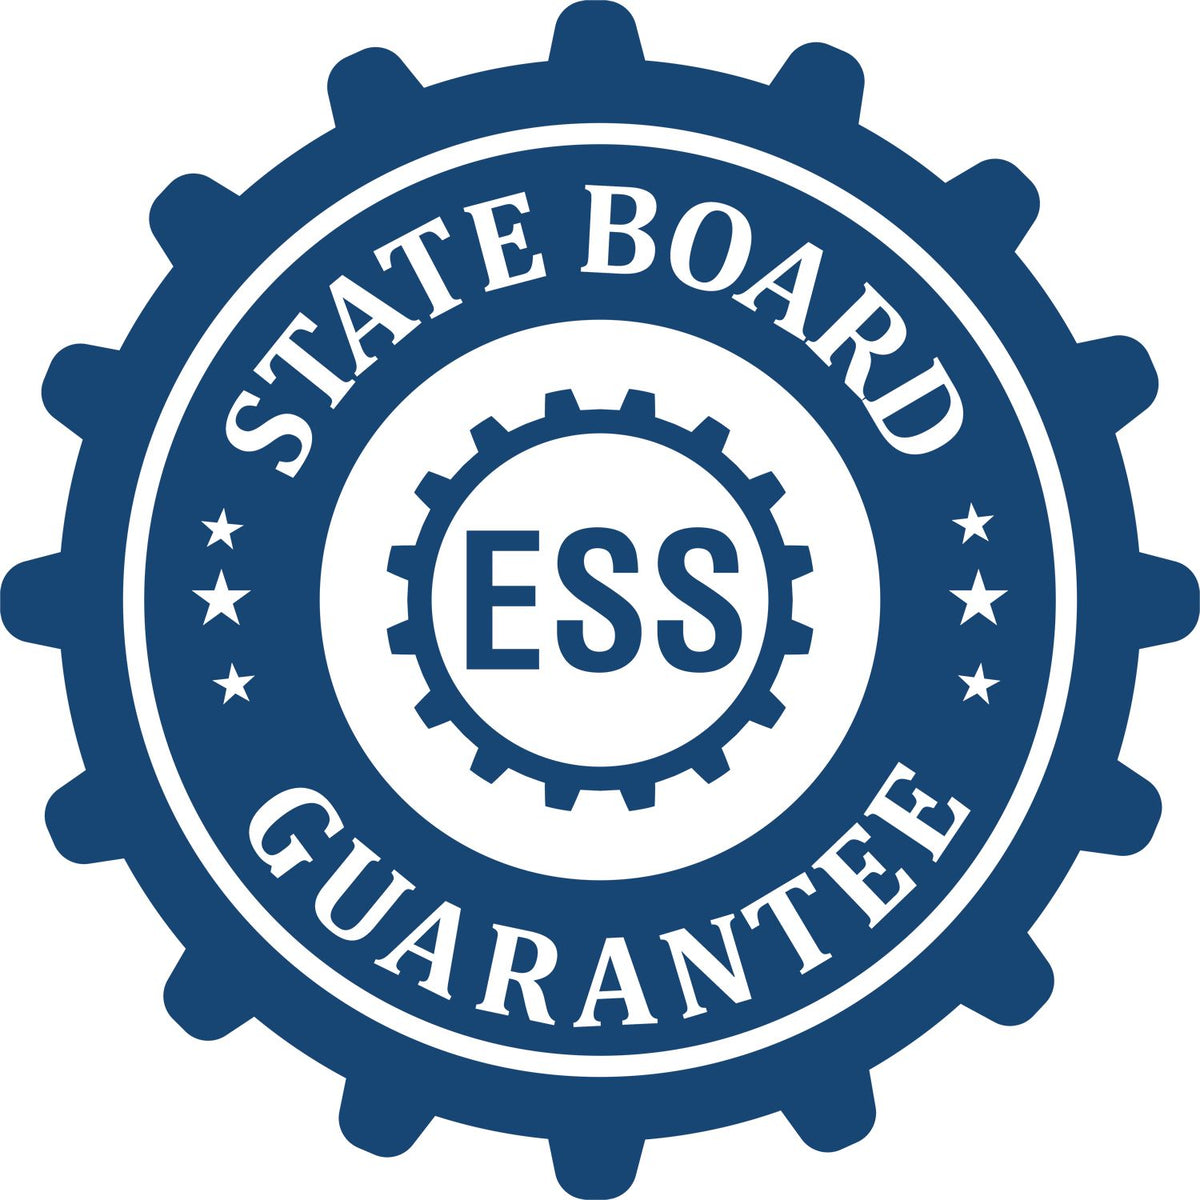 An emblem in a gear shape illustrating a state board guarantee for the Digital New Jersey Geologist Stamp, Electronic Seal for New Jersey Geologist